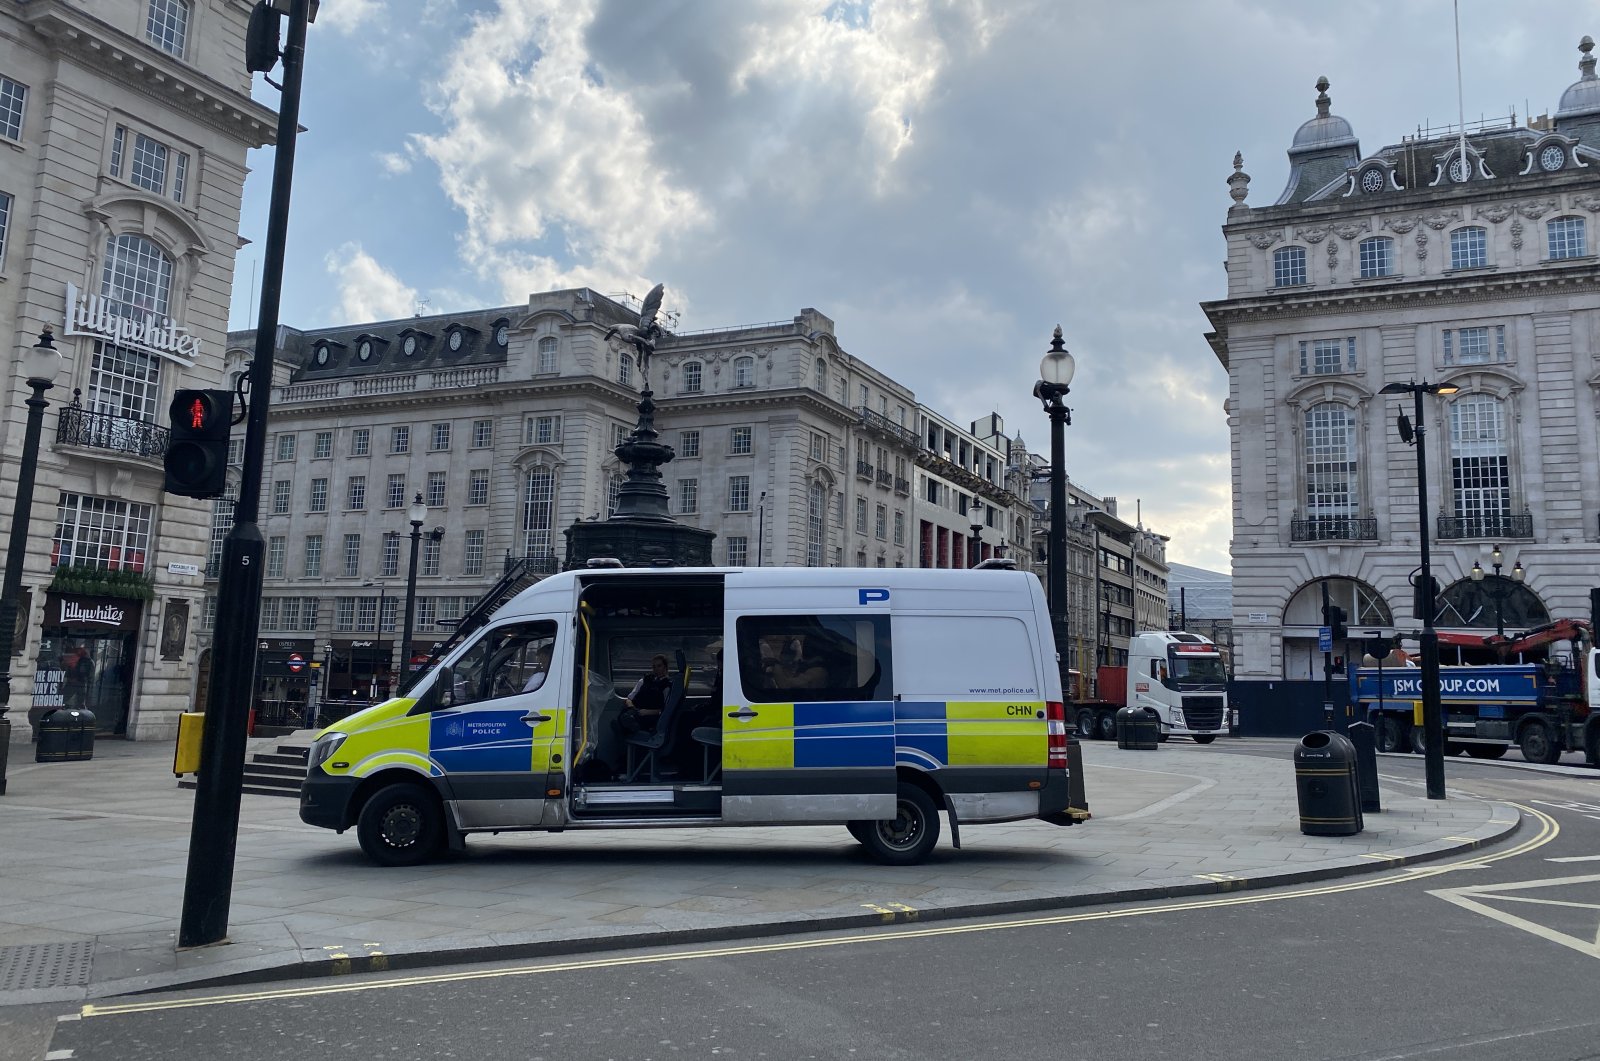 Police teams ensure London's normally crowded Piccadilly Circus remains crowd-free in light of pandemic measures, May 4, 2020 (AA Photo)